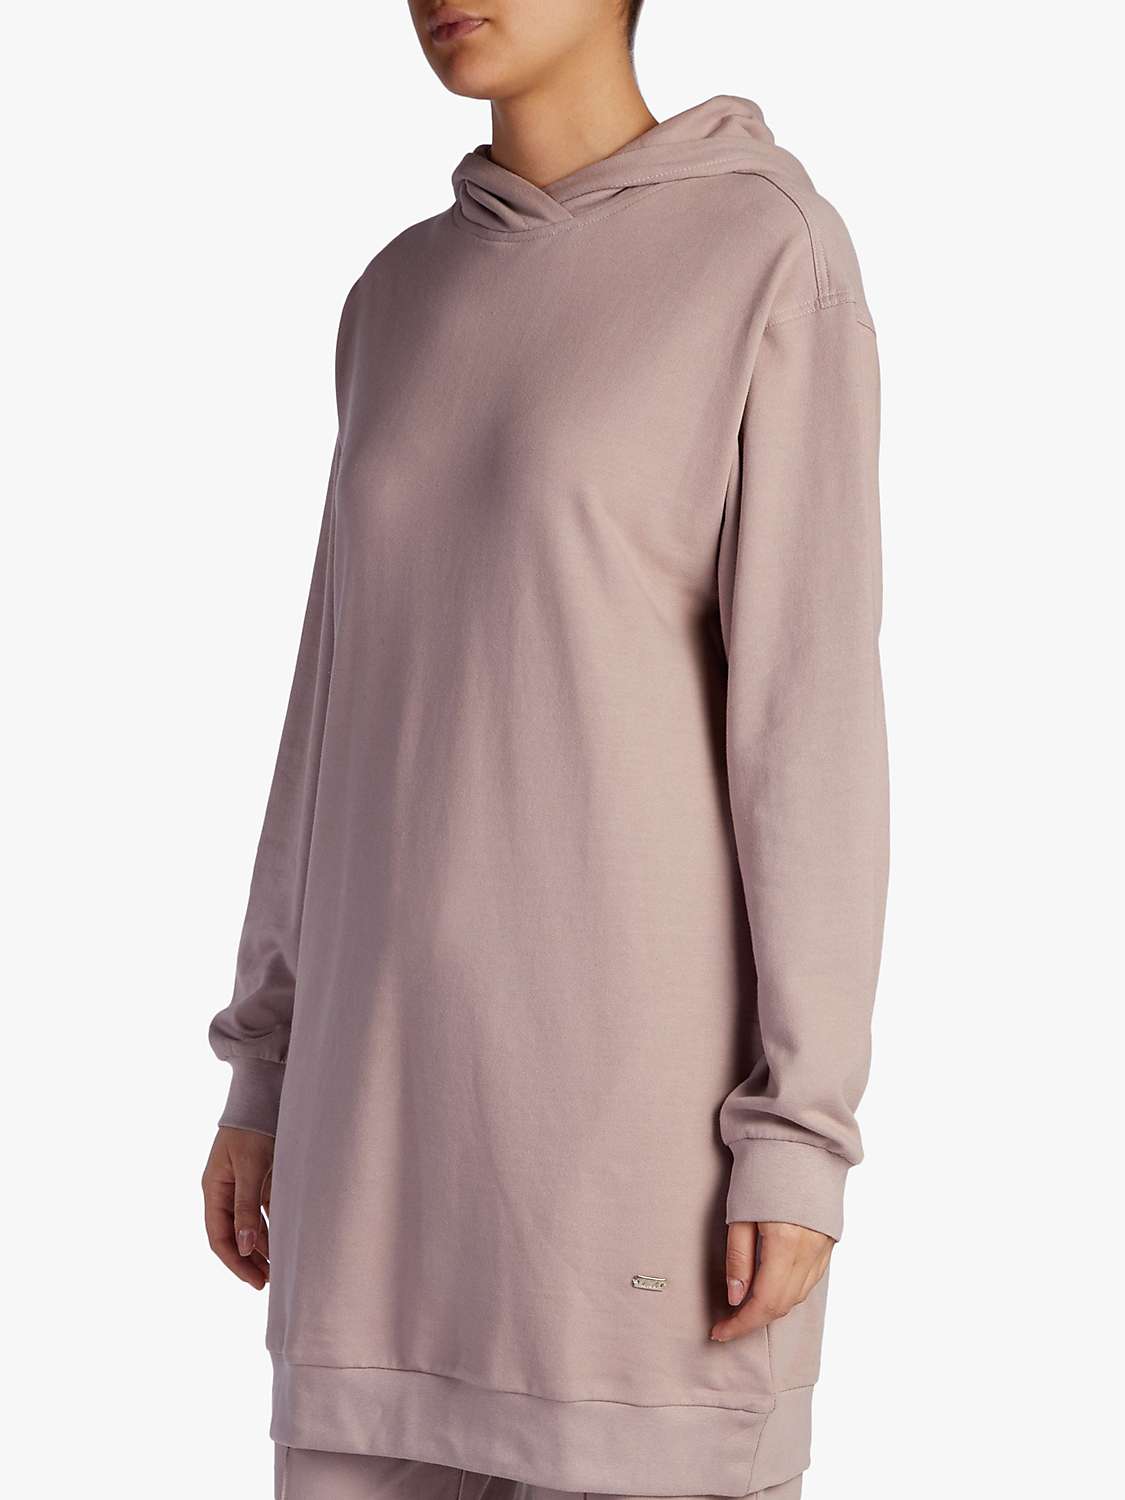 Buy Aab Cotton Cocoon Hoody Online at johnlewis.com